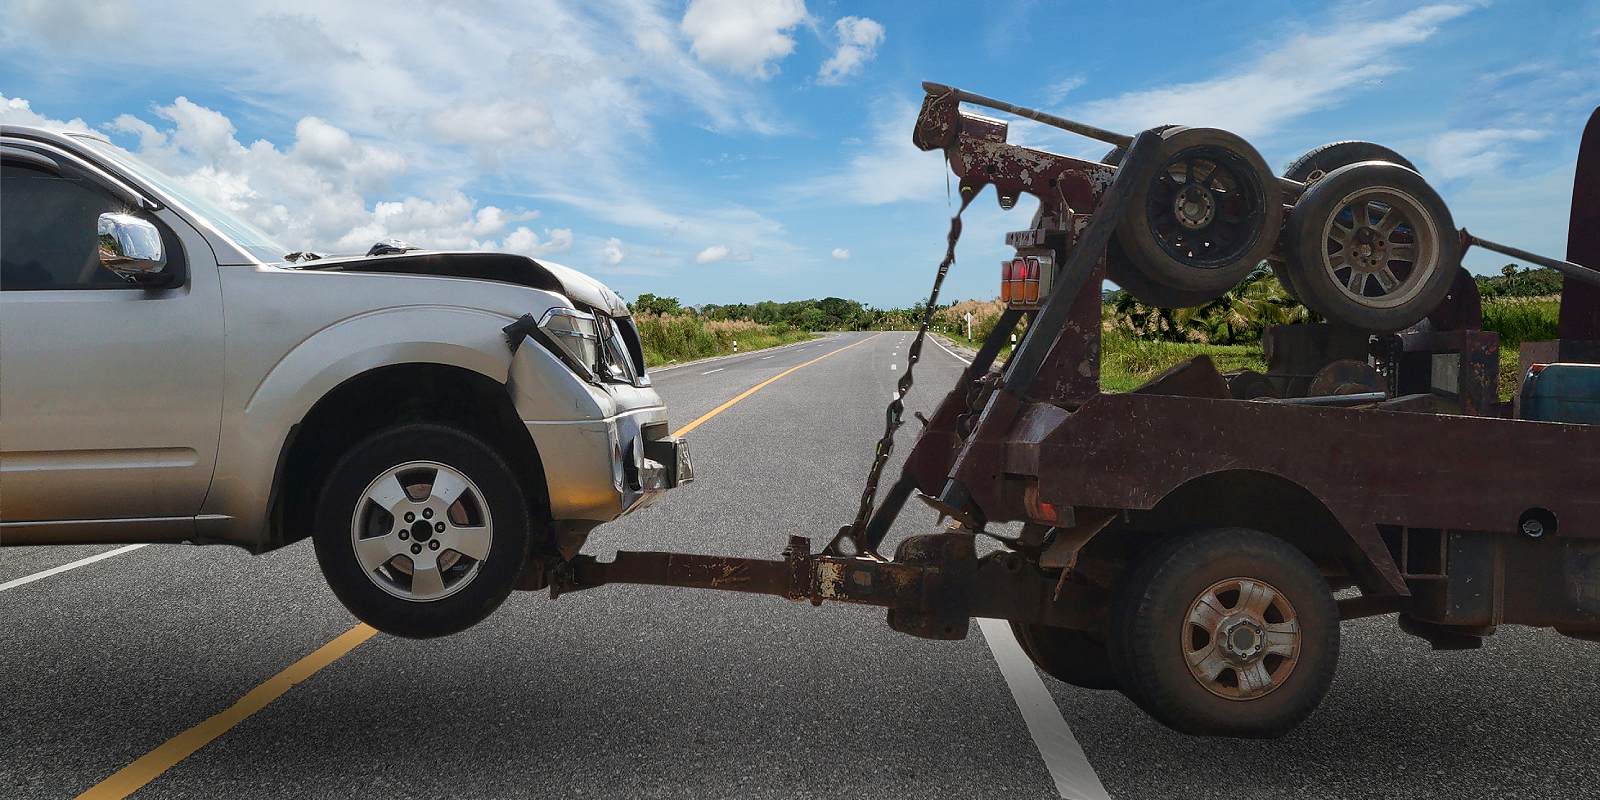 Towing Insurance 101 for Towing Companies - Pro Insurance Group